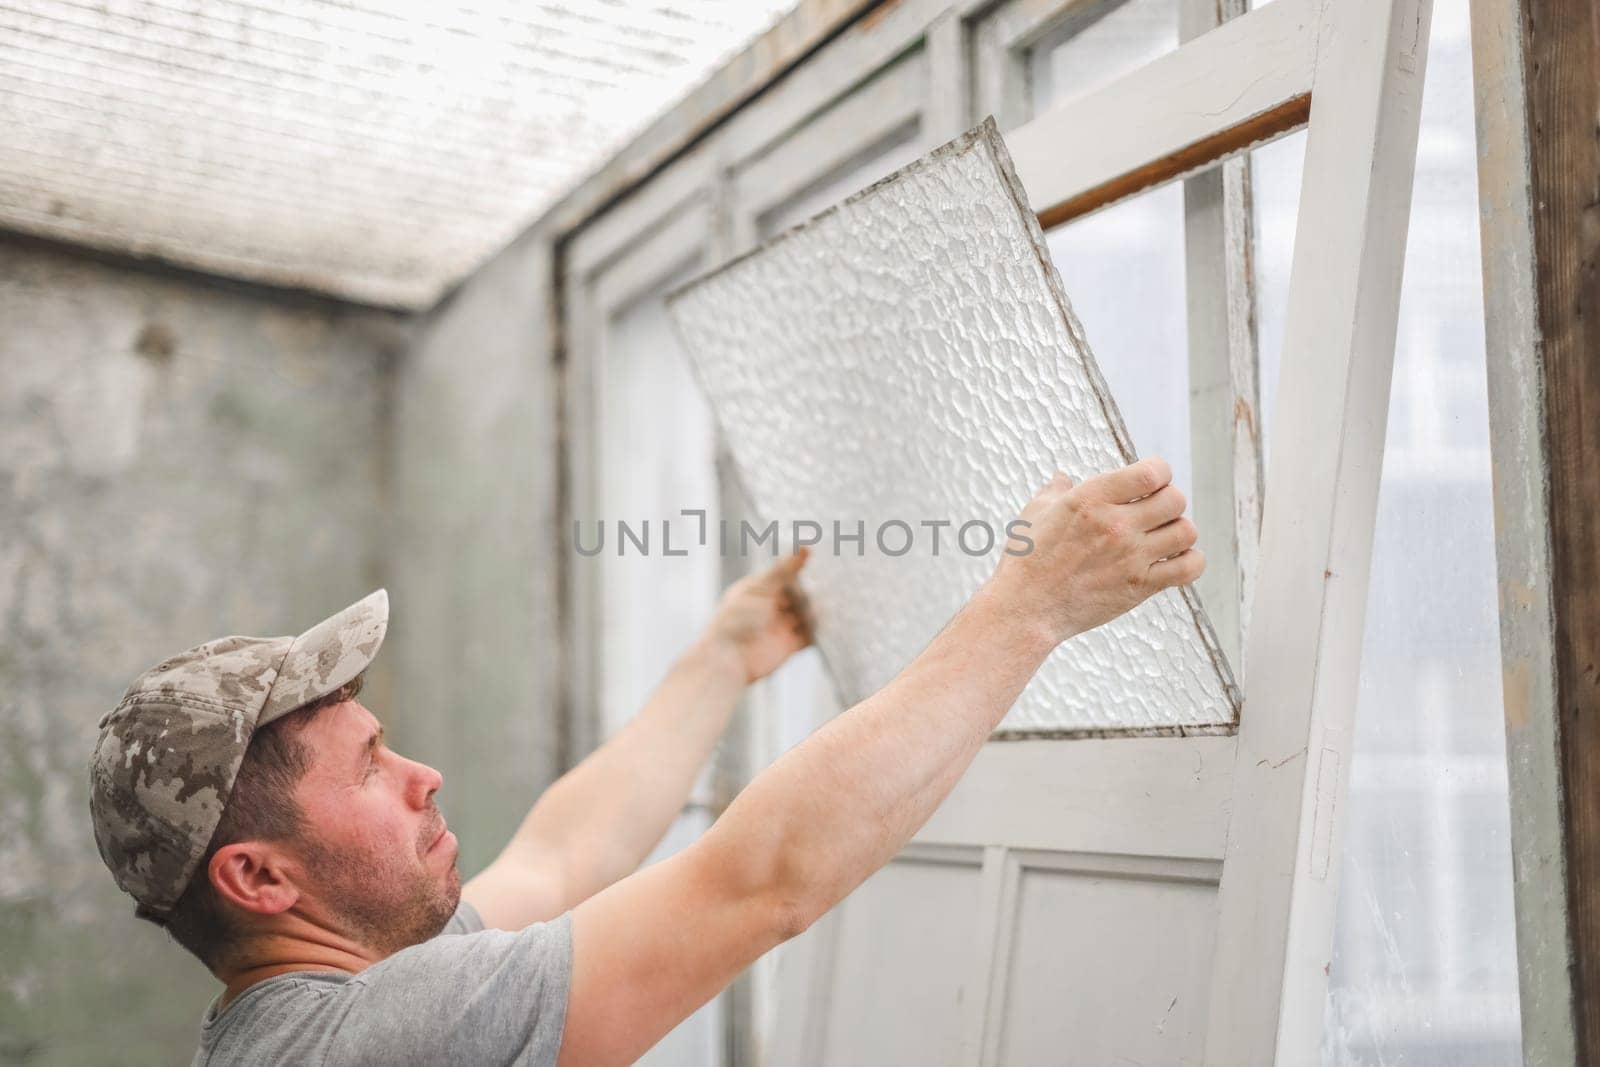 One young handsome Caucasian man in a gray T-shirt and cap removes with both hands the corrugated glass from an old door while standing in a room where renovations are underway, close-up side view.